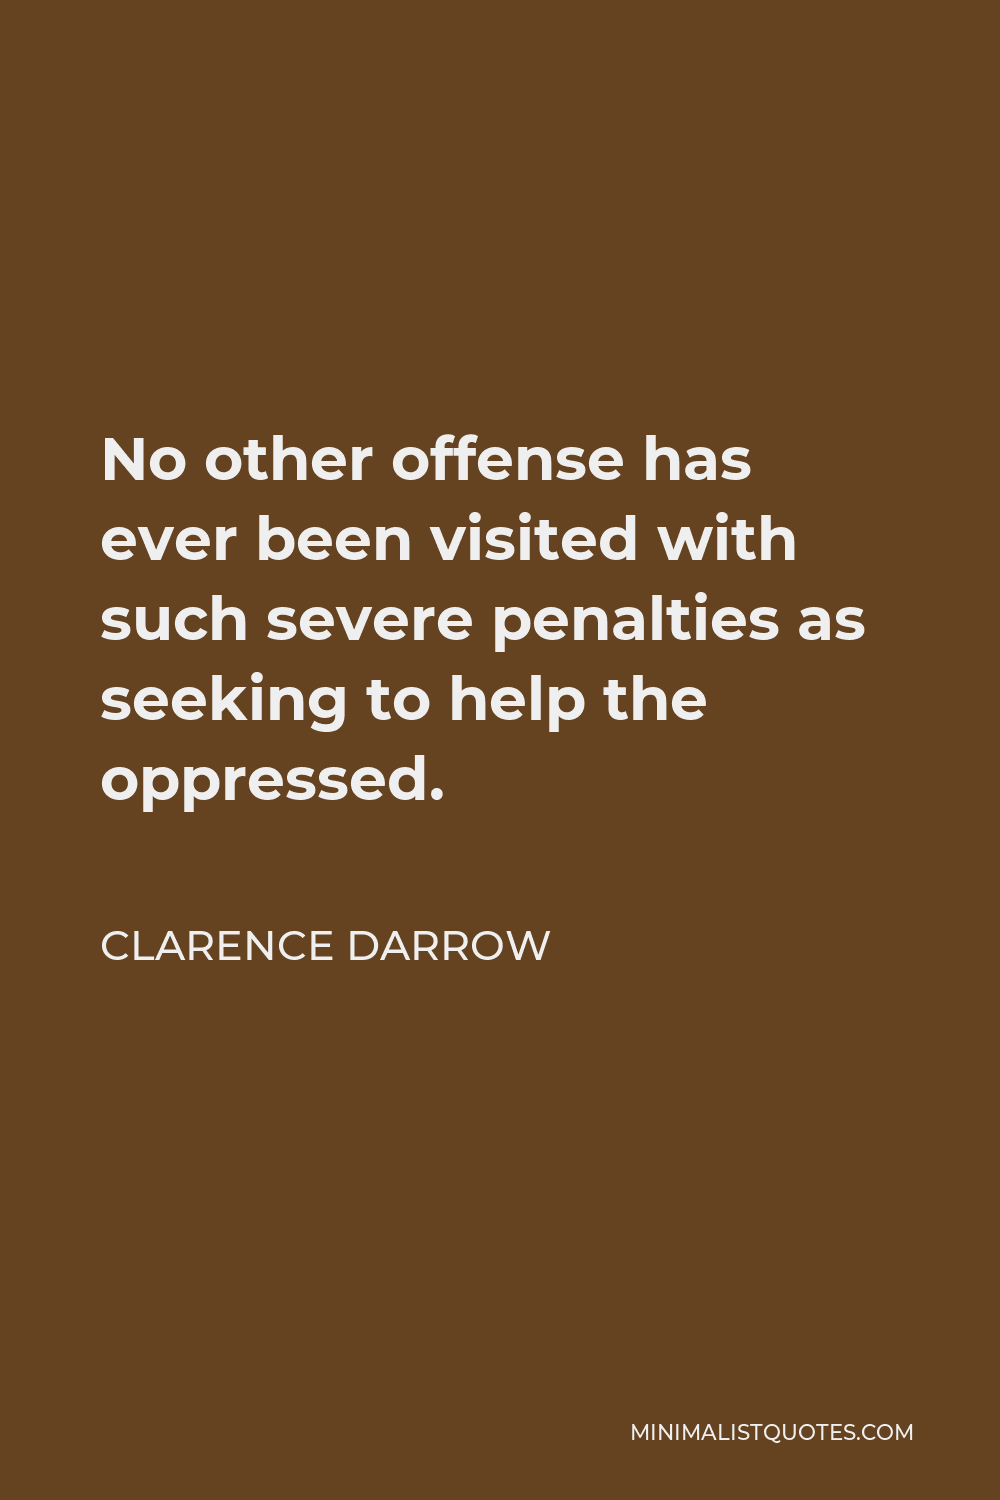 Clarence Darrow Quote - No other offense has ever been visited with such severe penalties as seeking to help the oppressed.